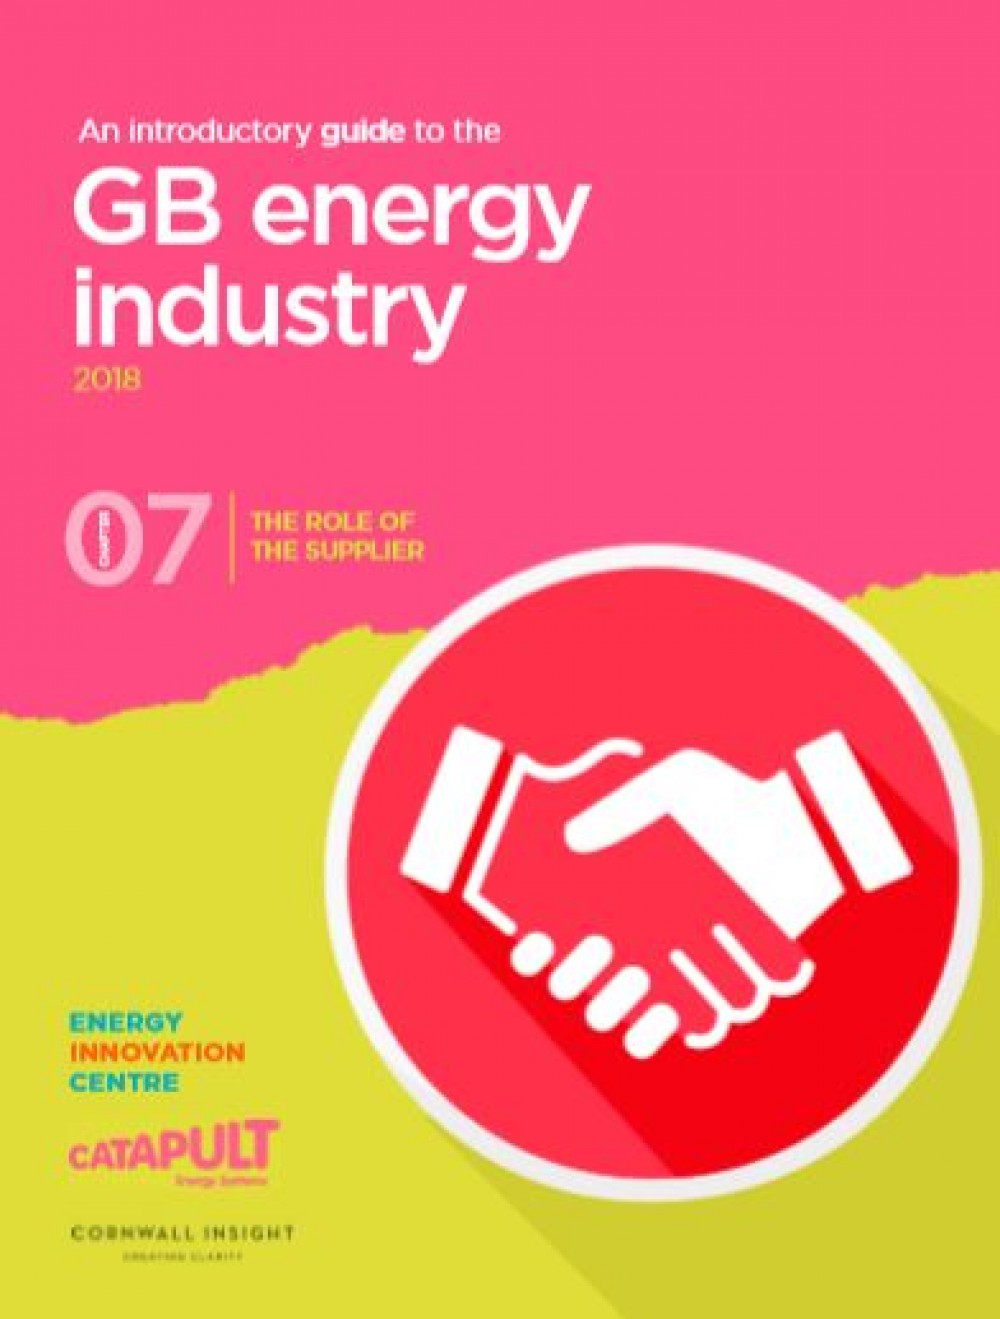 An introductory guide to the GB energy industry: The role of the supplier